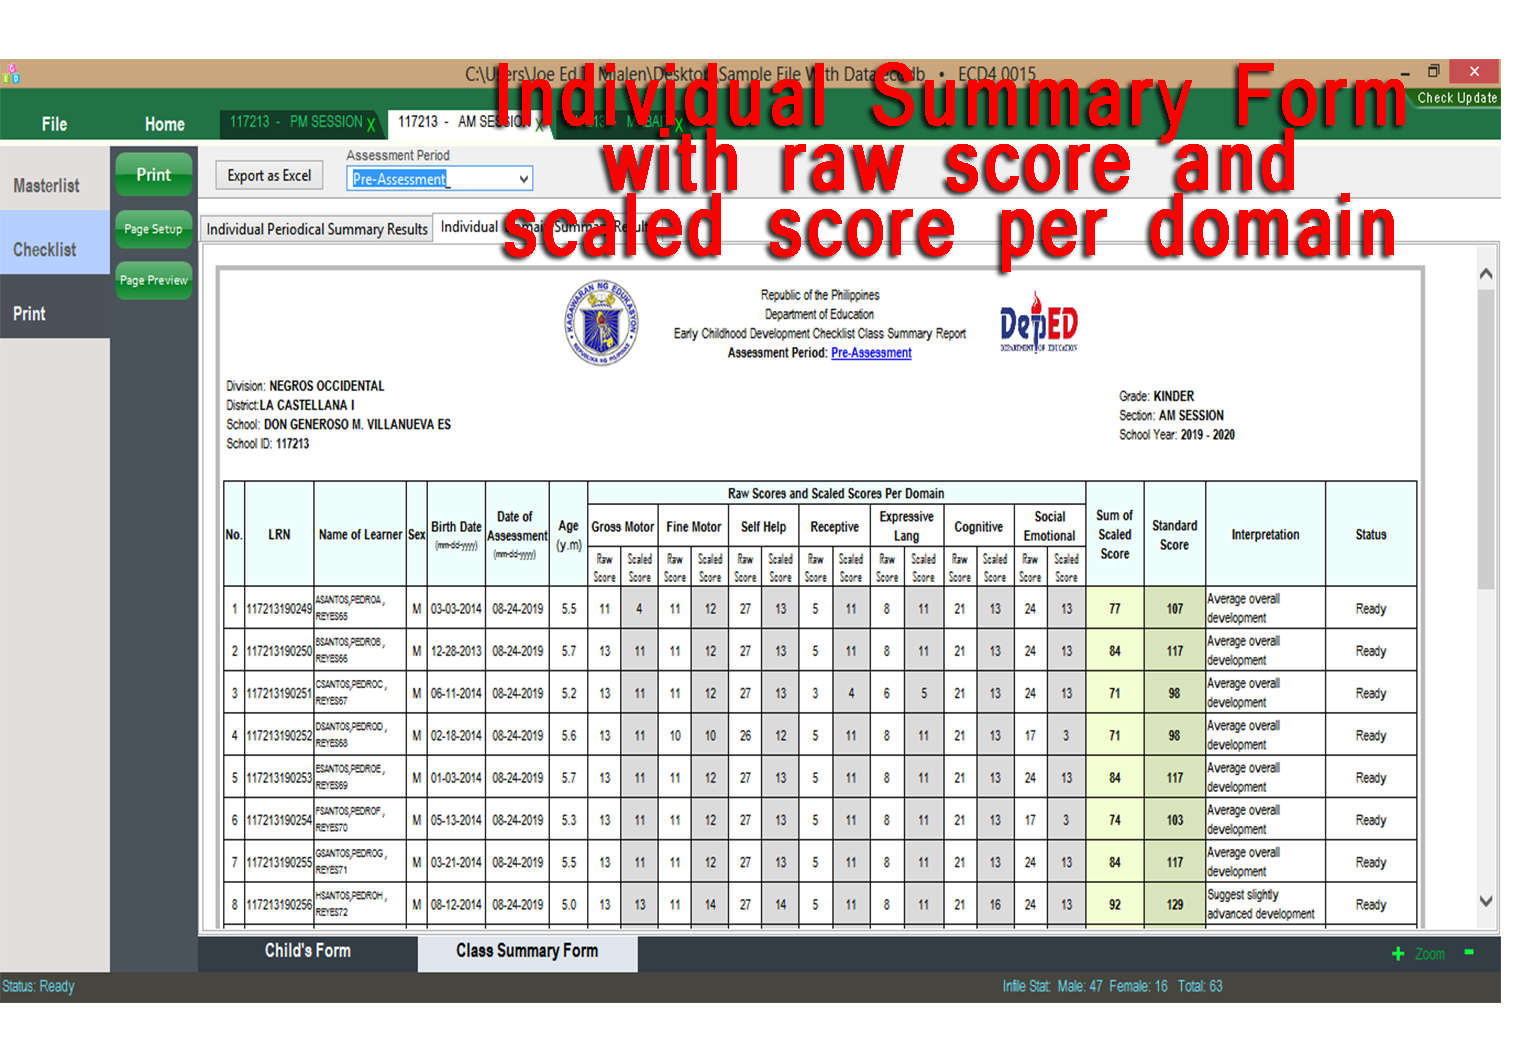 Individual summary form with raw score and scaled score per domain